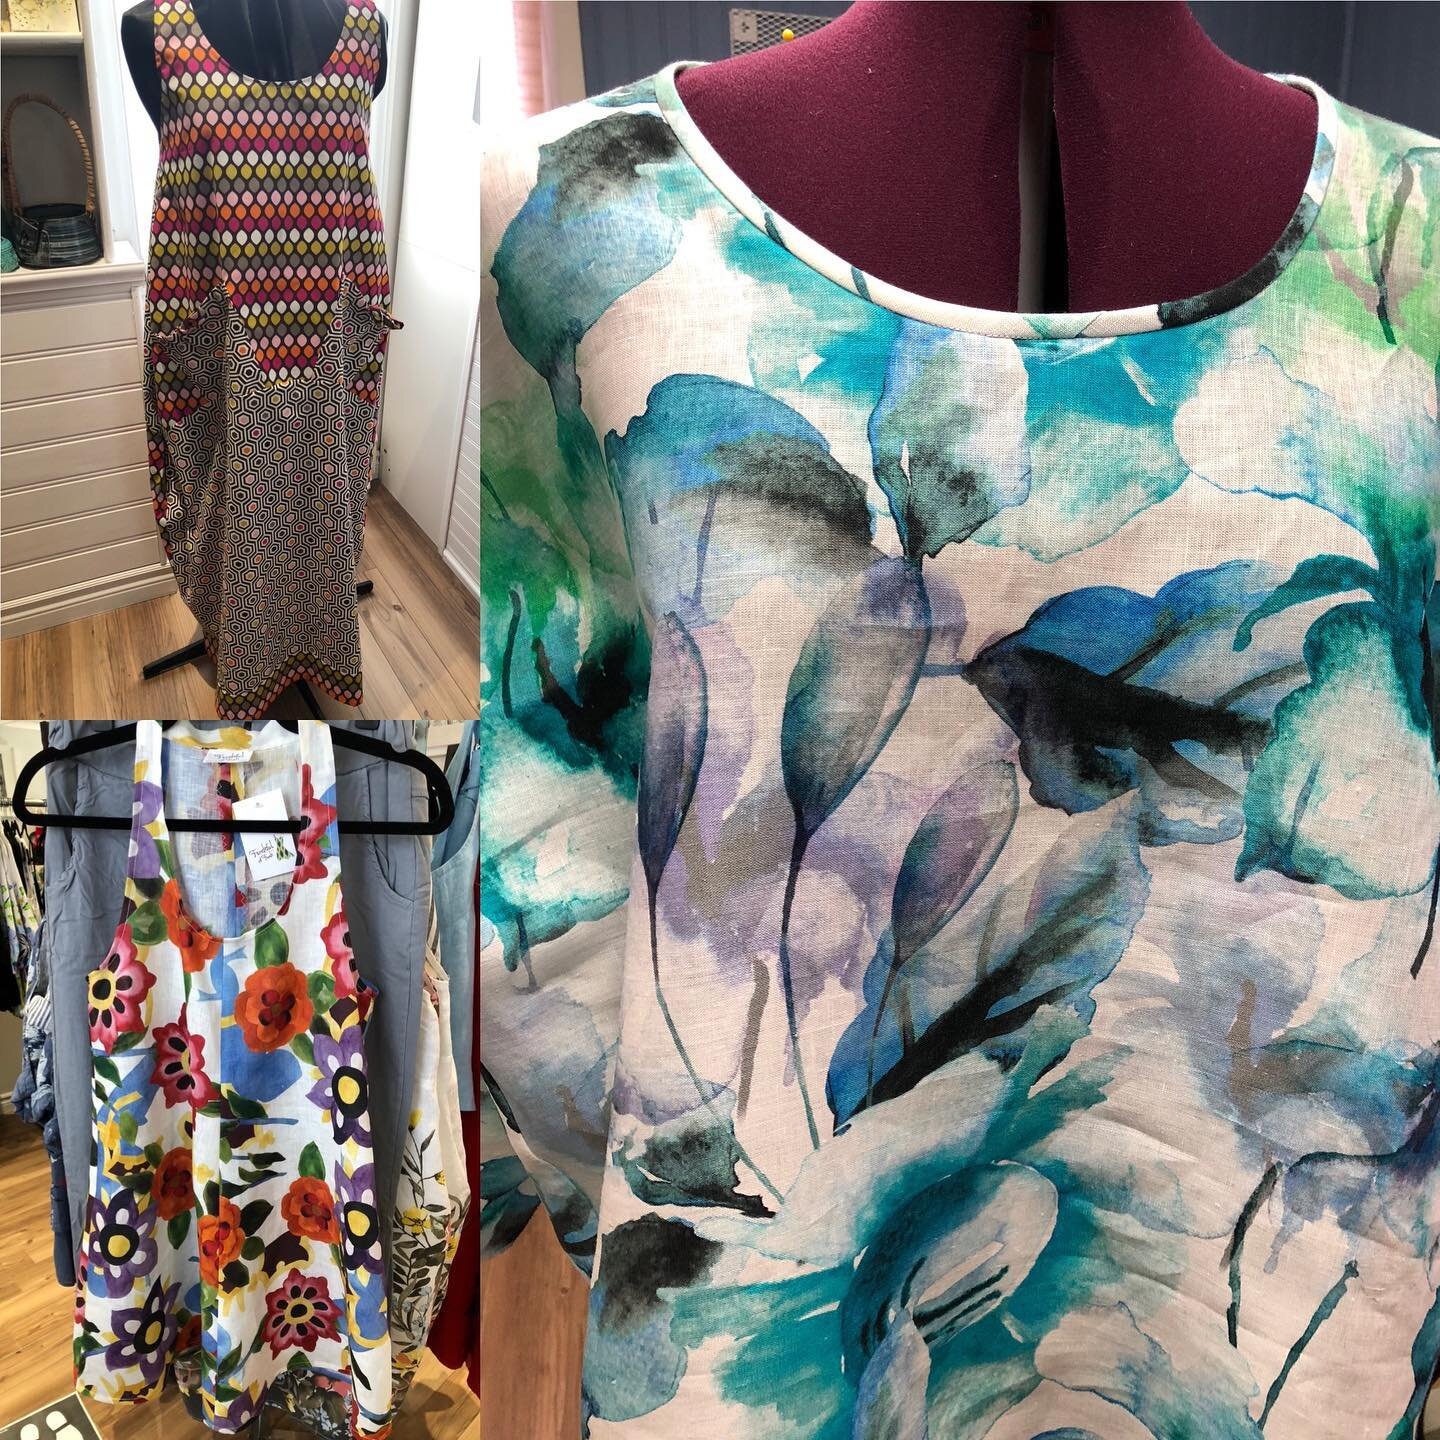 Working on Spring/Summer linens, cottons- dresses, tunics and tops!!
Stop in and check out what&rsquo;s new @fibrehuntsville @frockfuloffunk #slowfashion #handmadeinmuskoka #sunnyclothes #hereitcomes #linen #cotton #funkyfearlessfashion